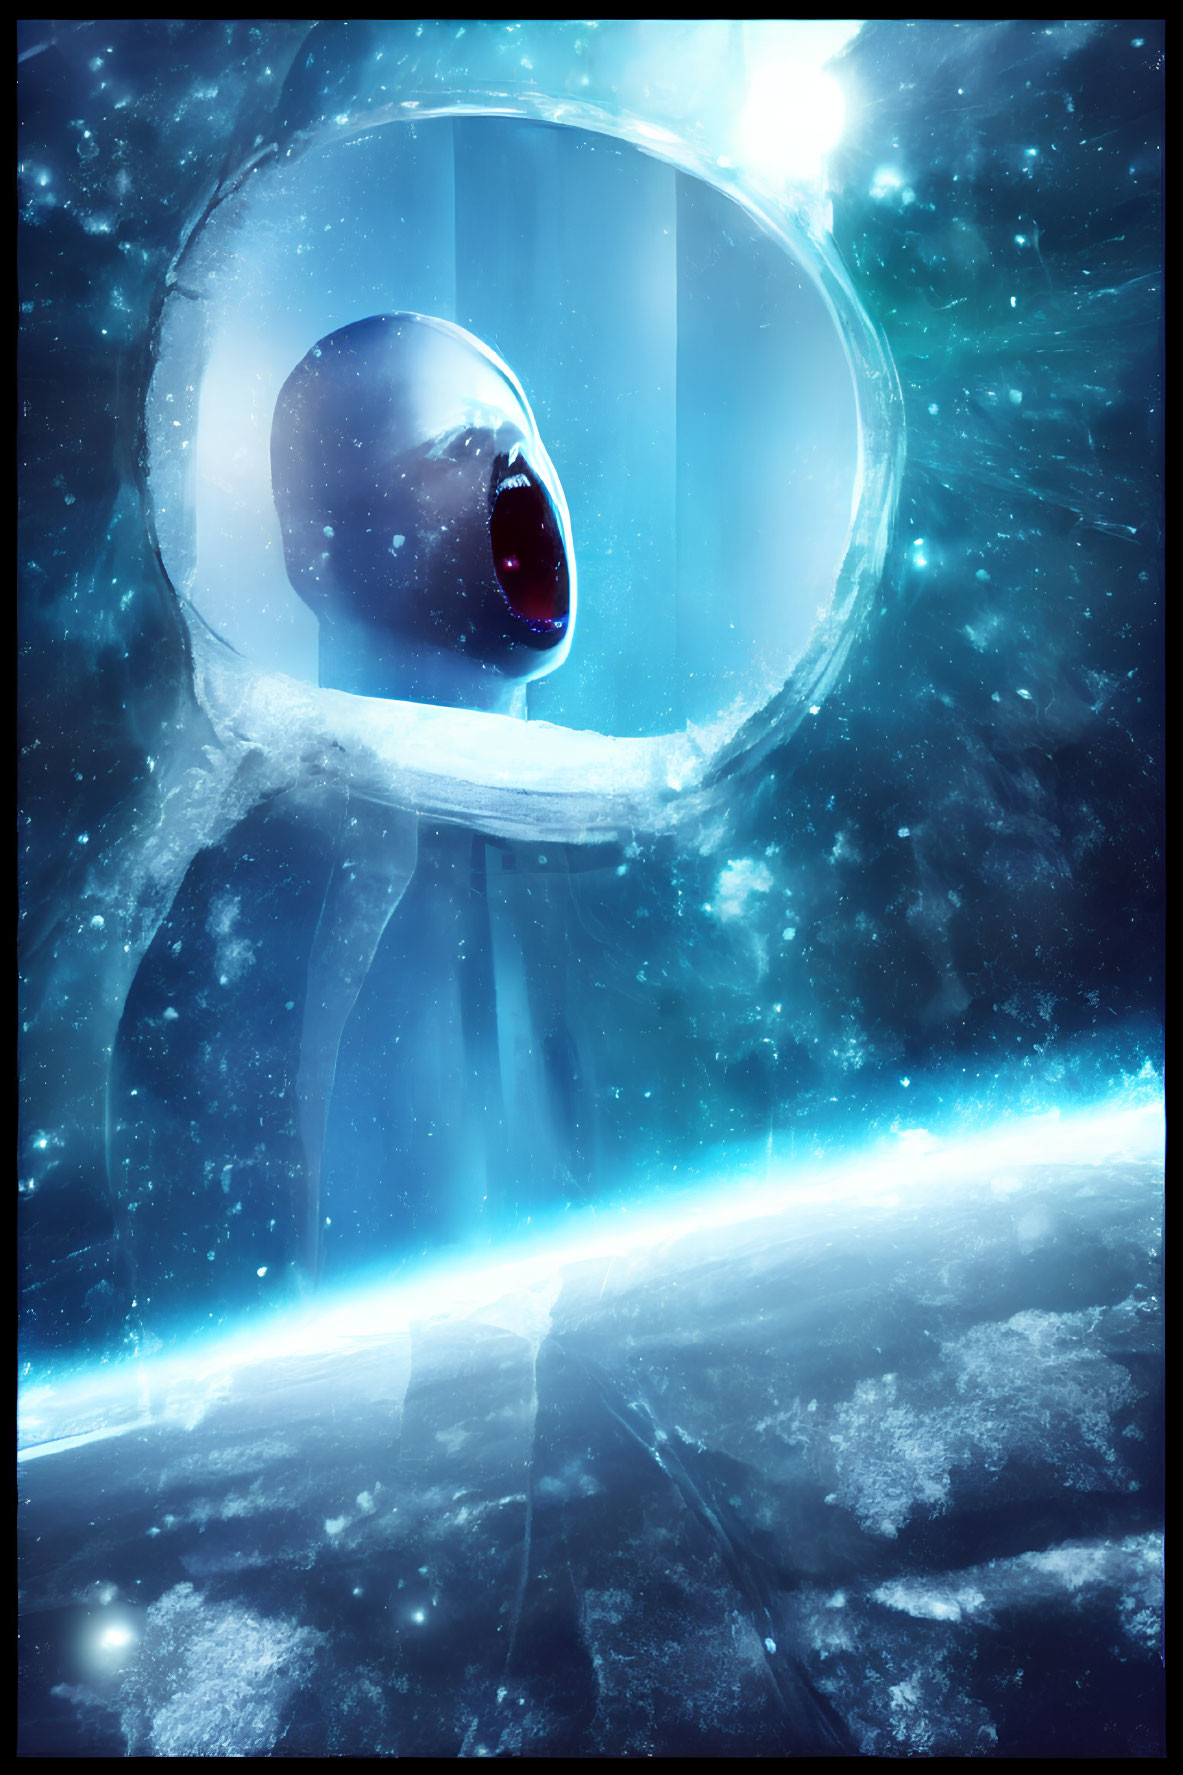 Surreal cosmic entity with glowing core and icy rings in starry expanse